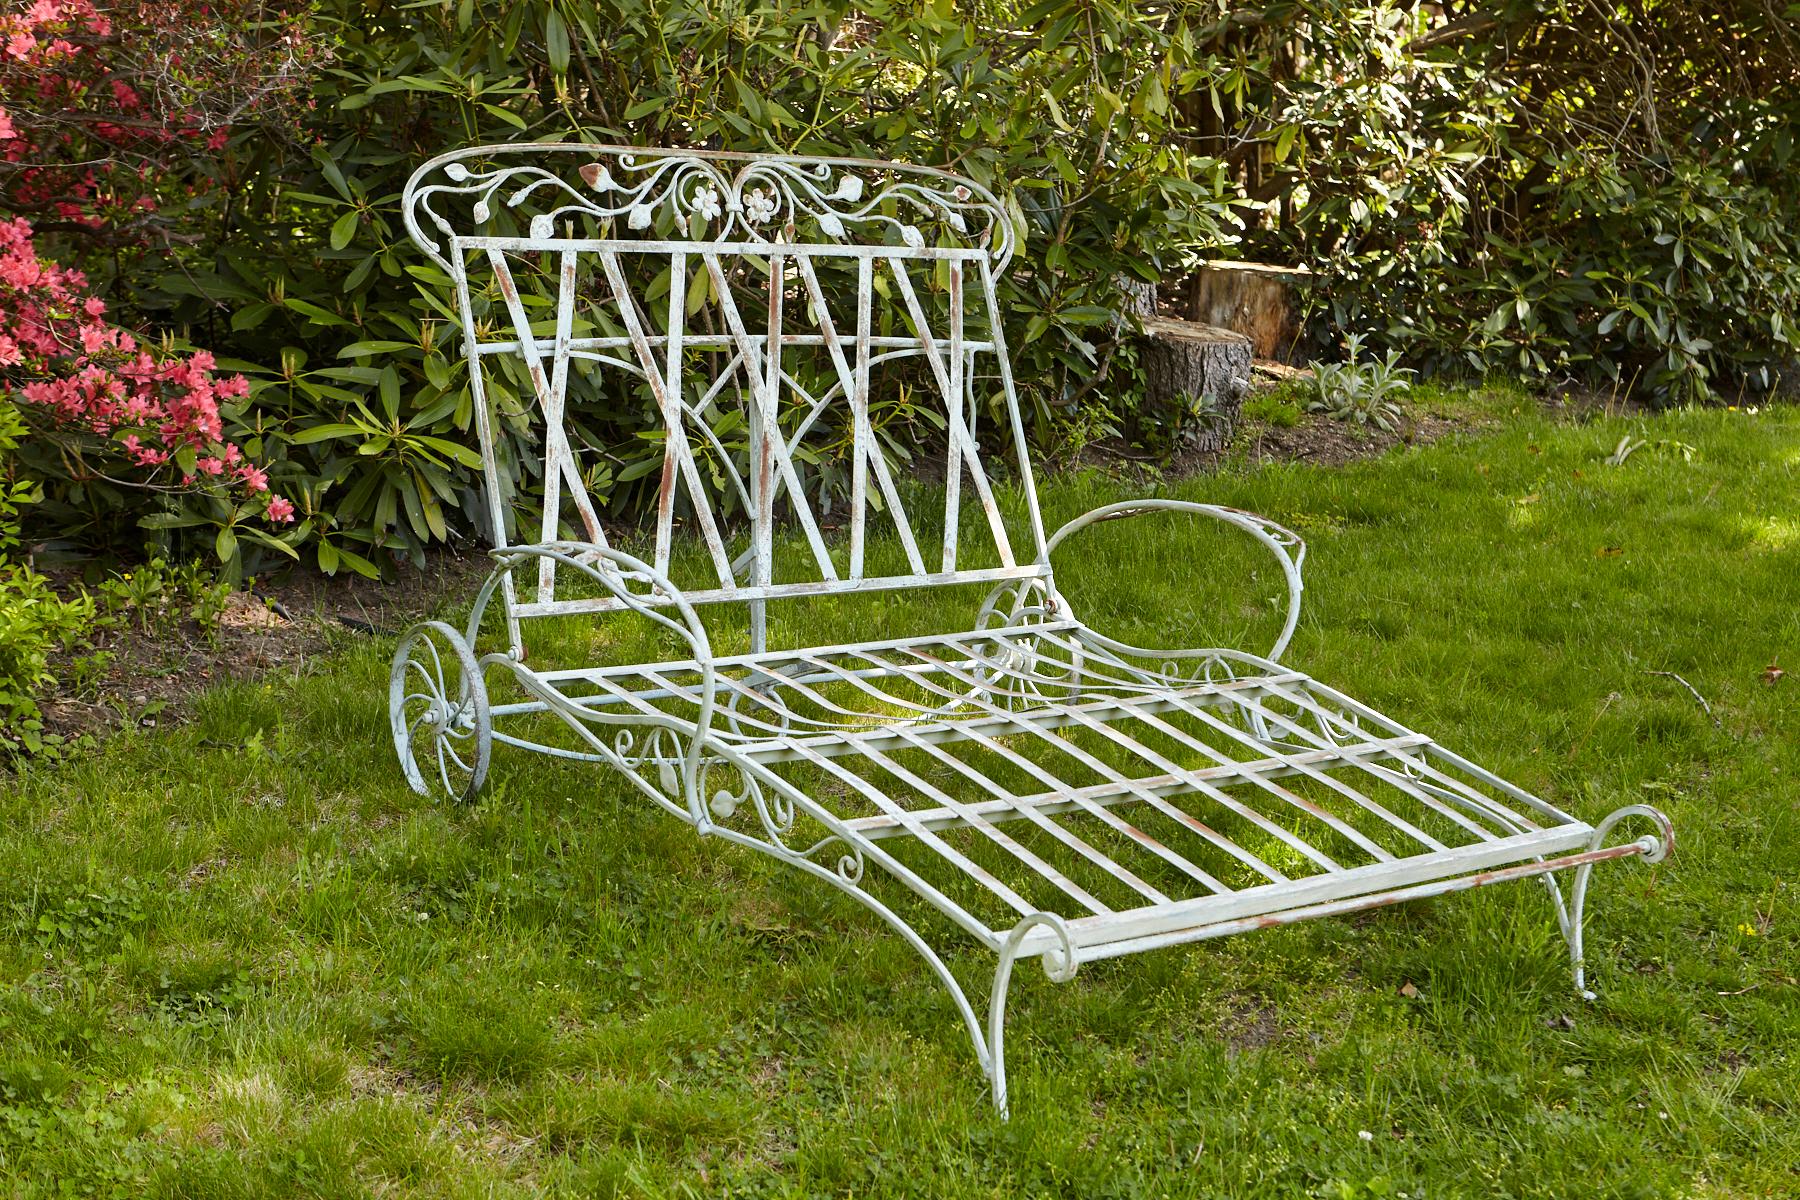 A rare Salterini elaborate wrought iron double chaise lounge in his blooming rose pattern / group from the 1940s.
The chaise lounge is in a very good condition, solid and sturdy, part of the Neva-Rust outdoor product range of Salterin's garden